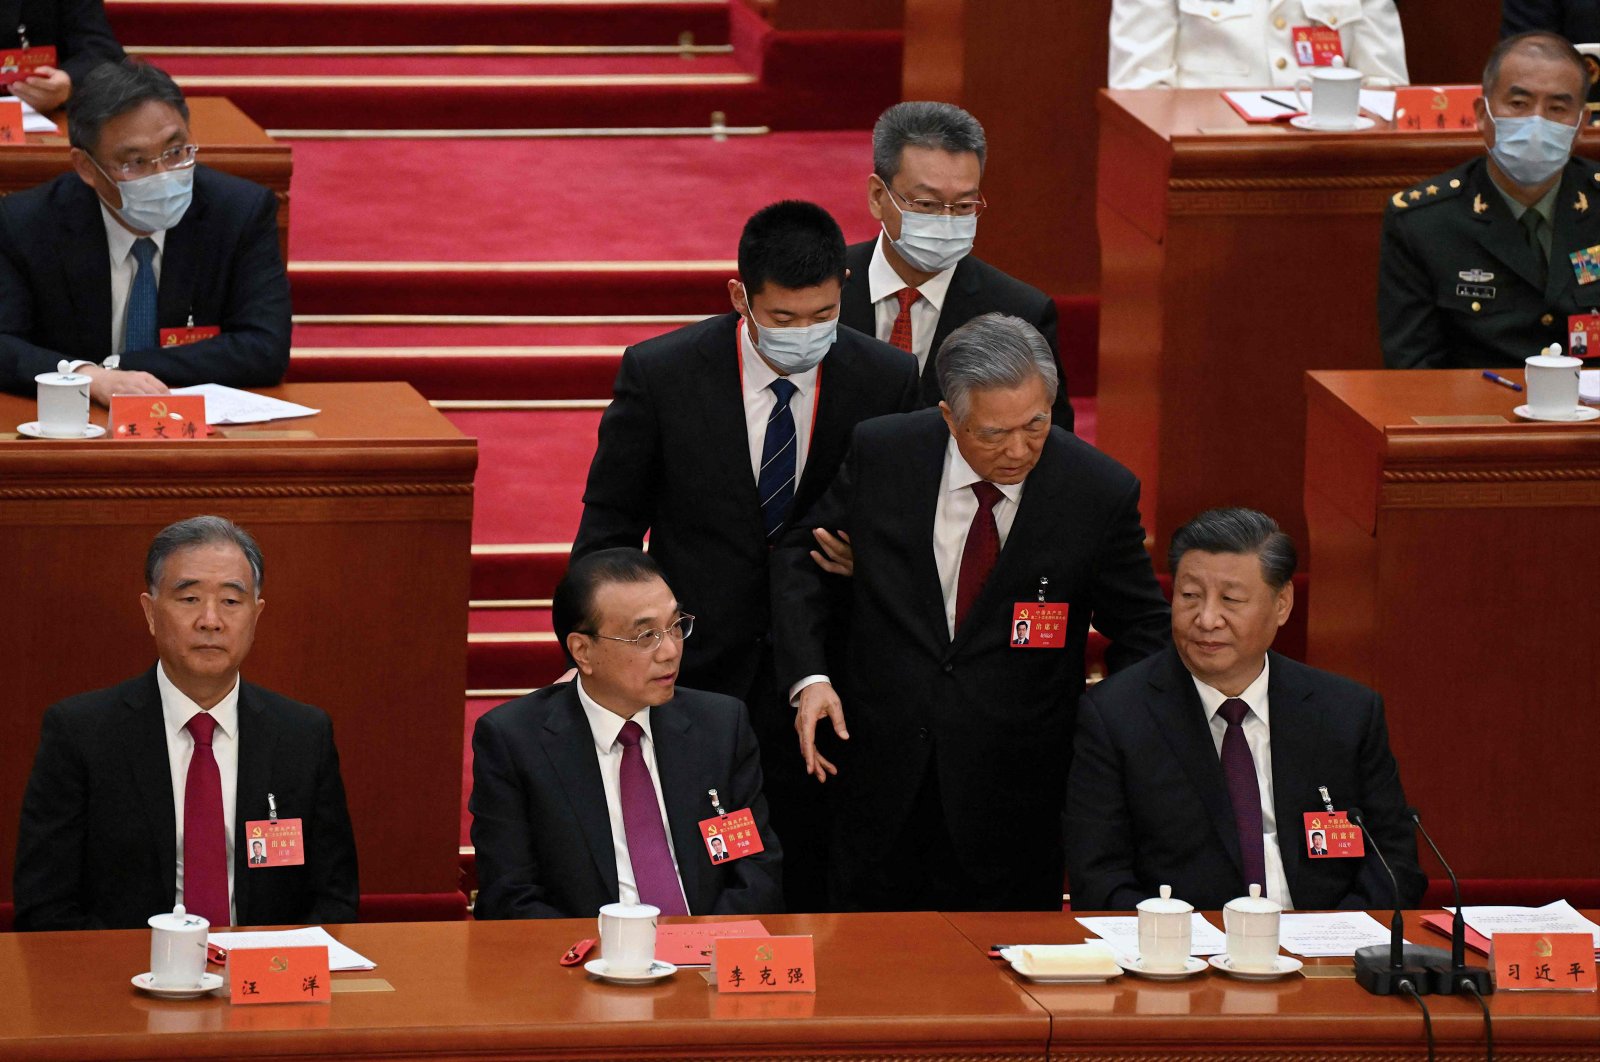 China&#039;s President Xi Jinping (R) sits beside Premier Li Keqiang (2nd L) as former President Hu Jintao (2nd R) is assisted to leave the closing ceremony of the 20th China&#039;s Communist Party&#039;s National Congress at the Great Hall of the People in Beijing, China, Oct. 22, 2022. (AFP Photo)